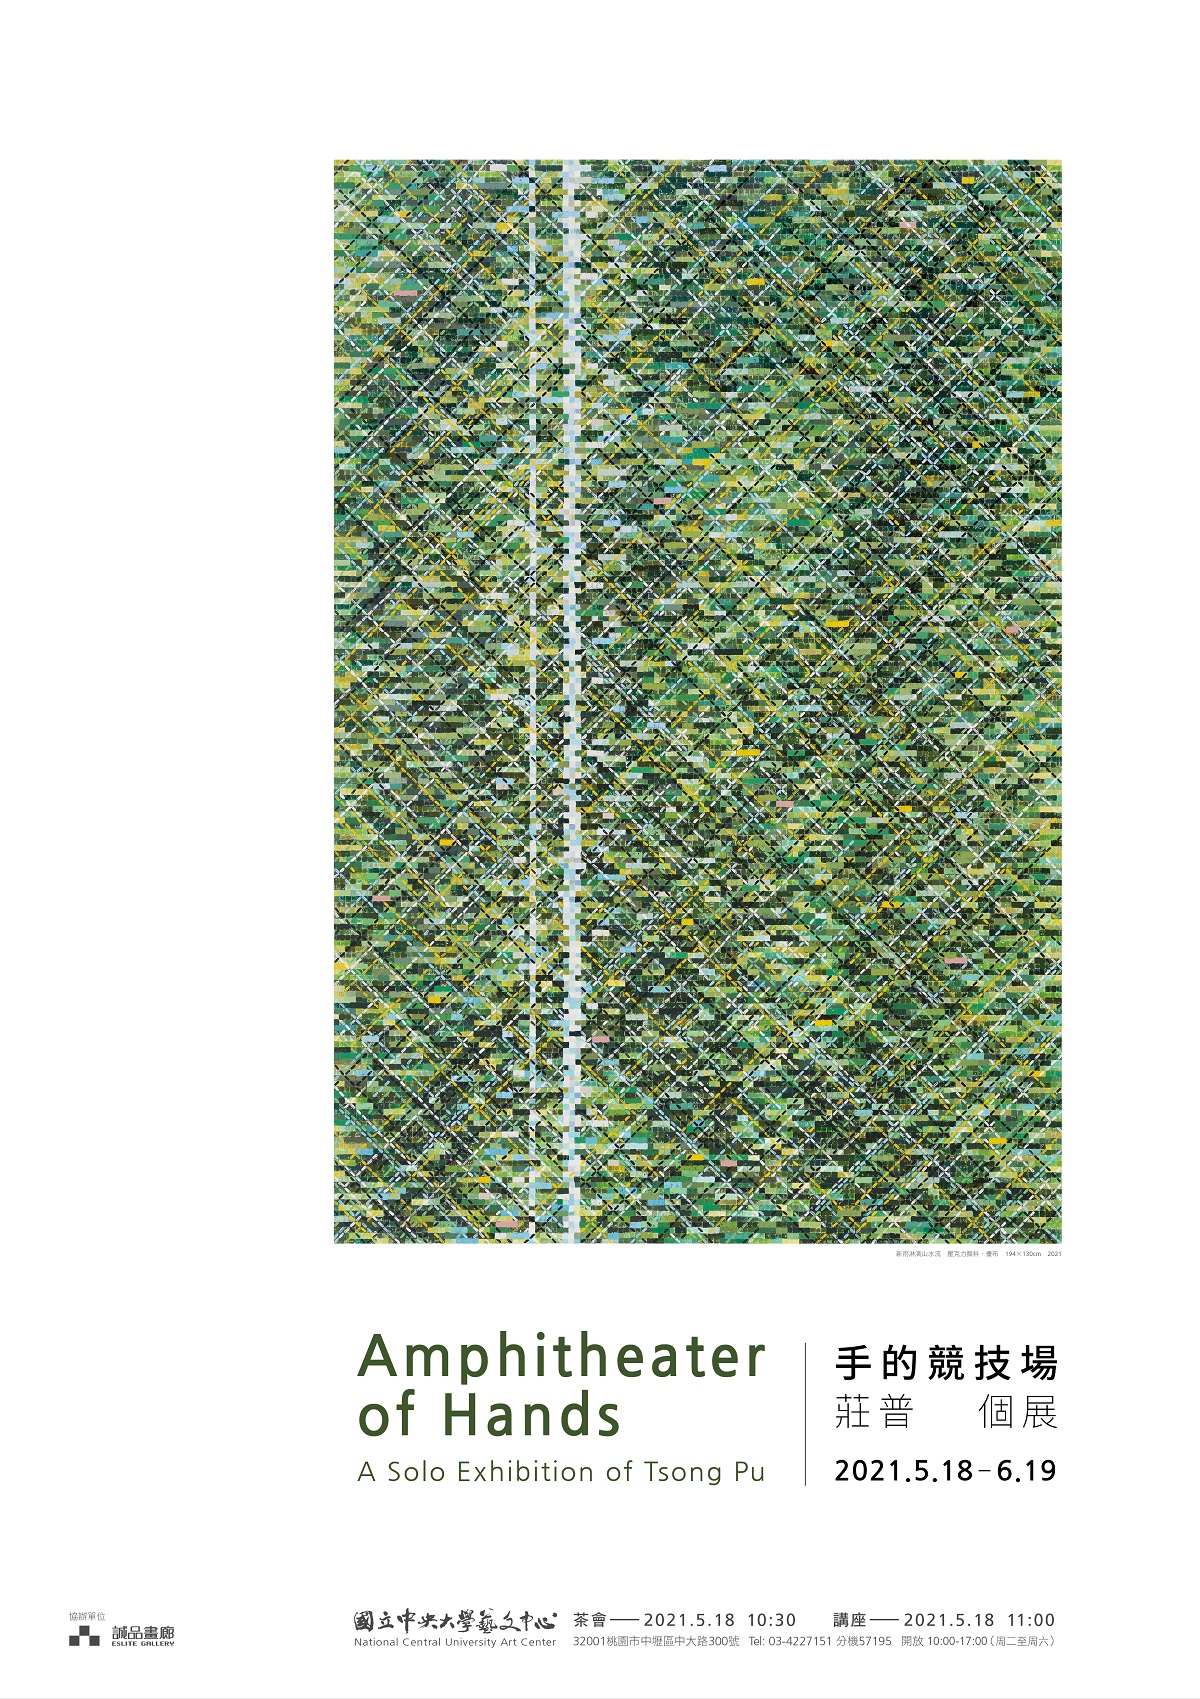 Amphitheater of Hands - A Solo Exhibition of Tsong Pu